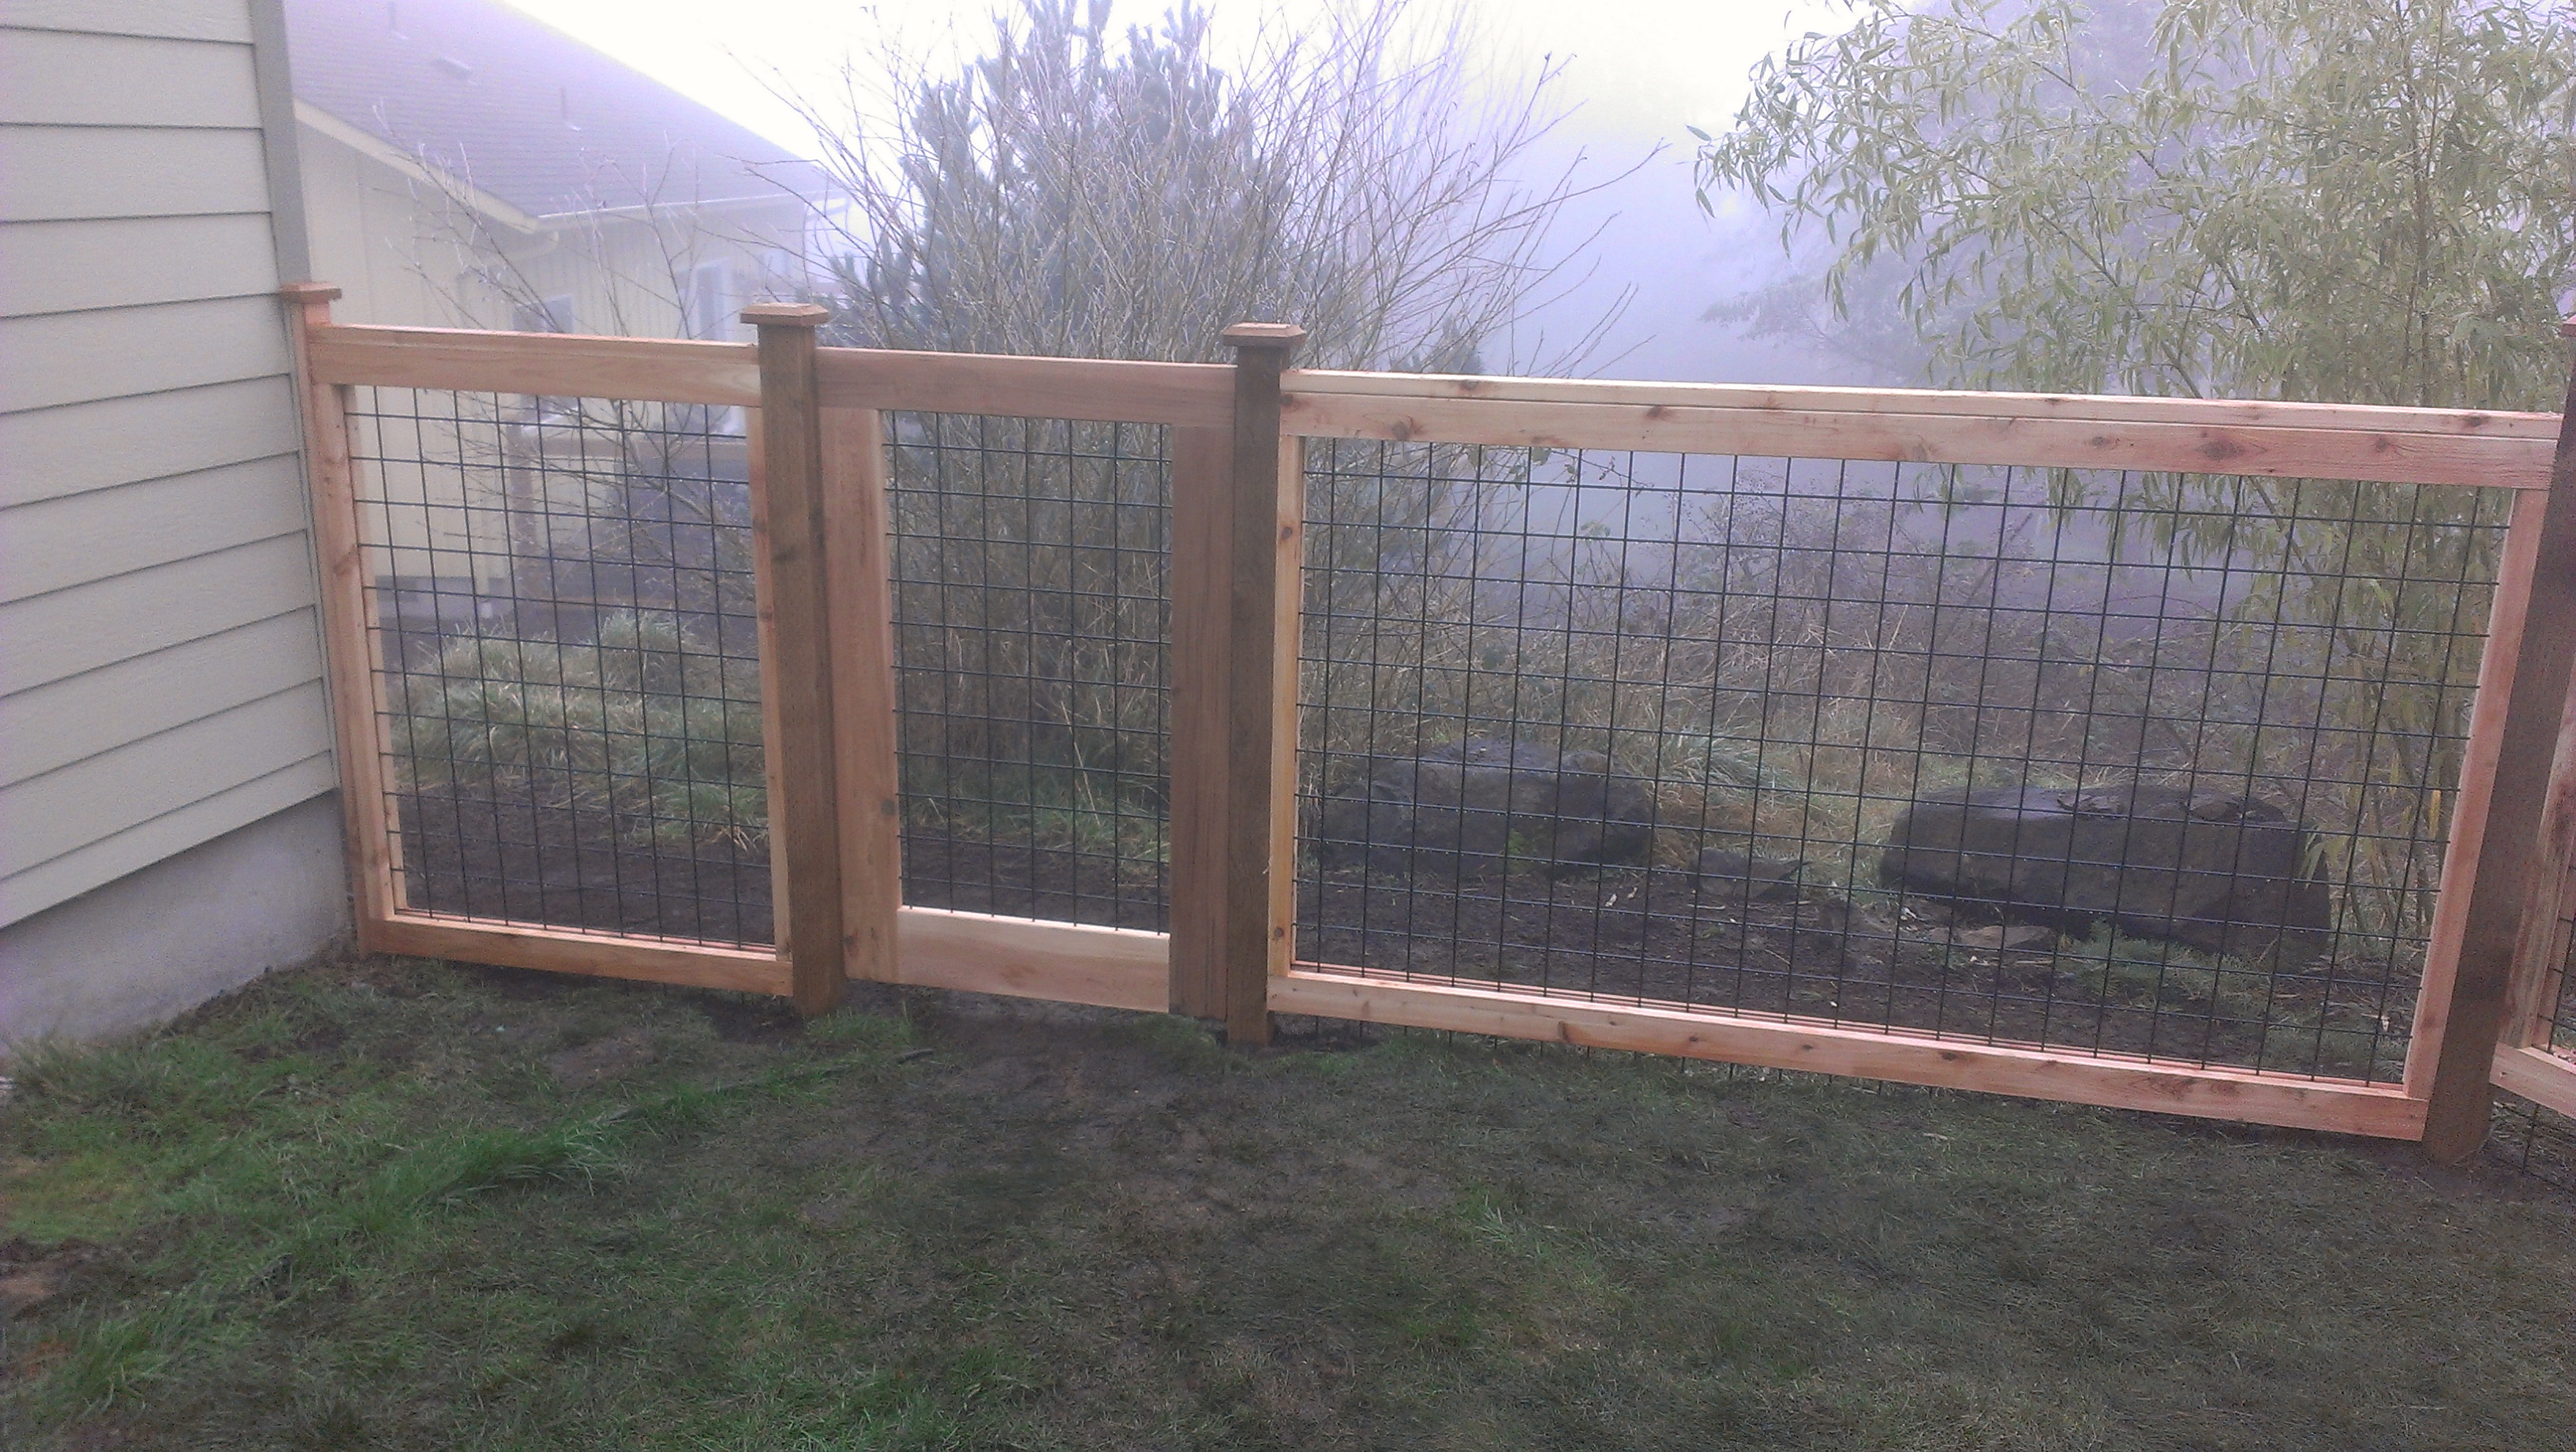 Phil's powder coated wire grid fence and gates - Black Diamond Fencing